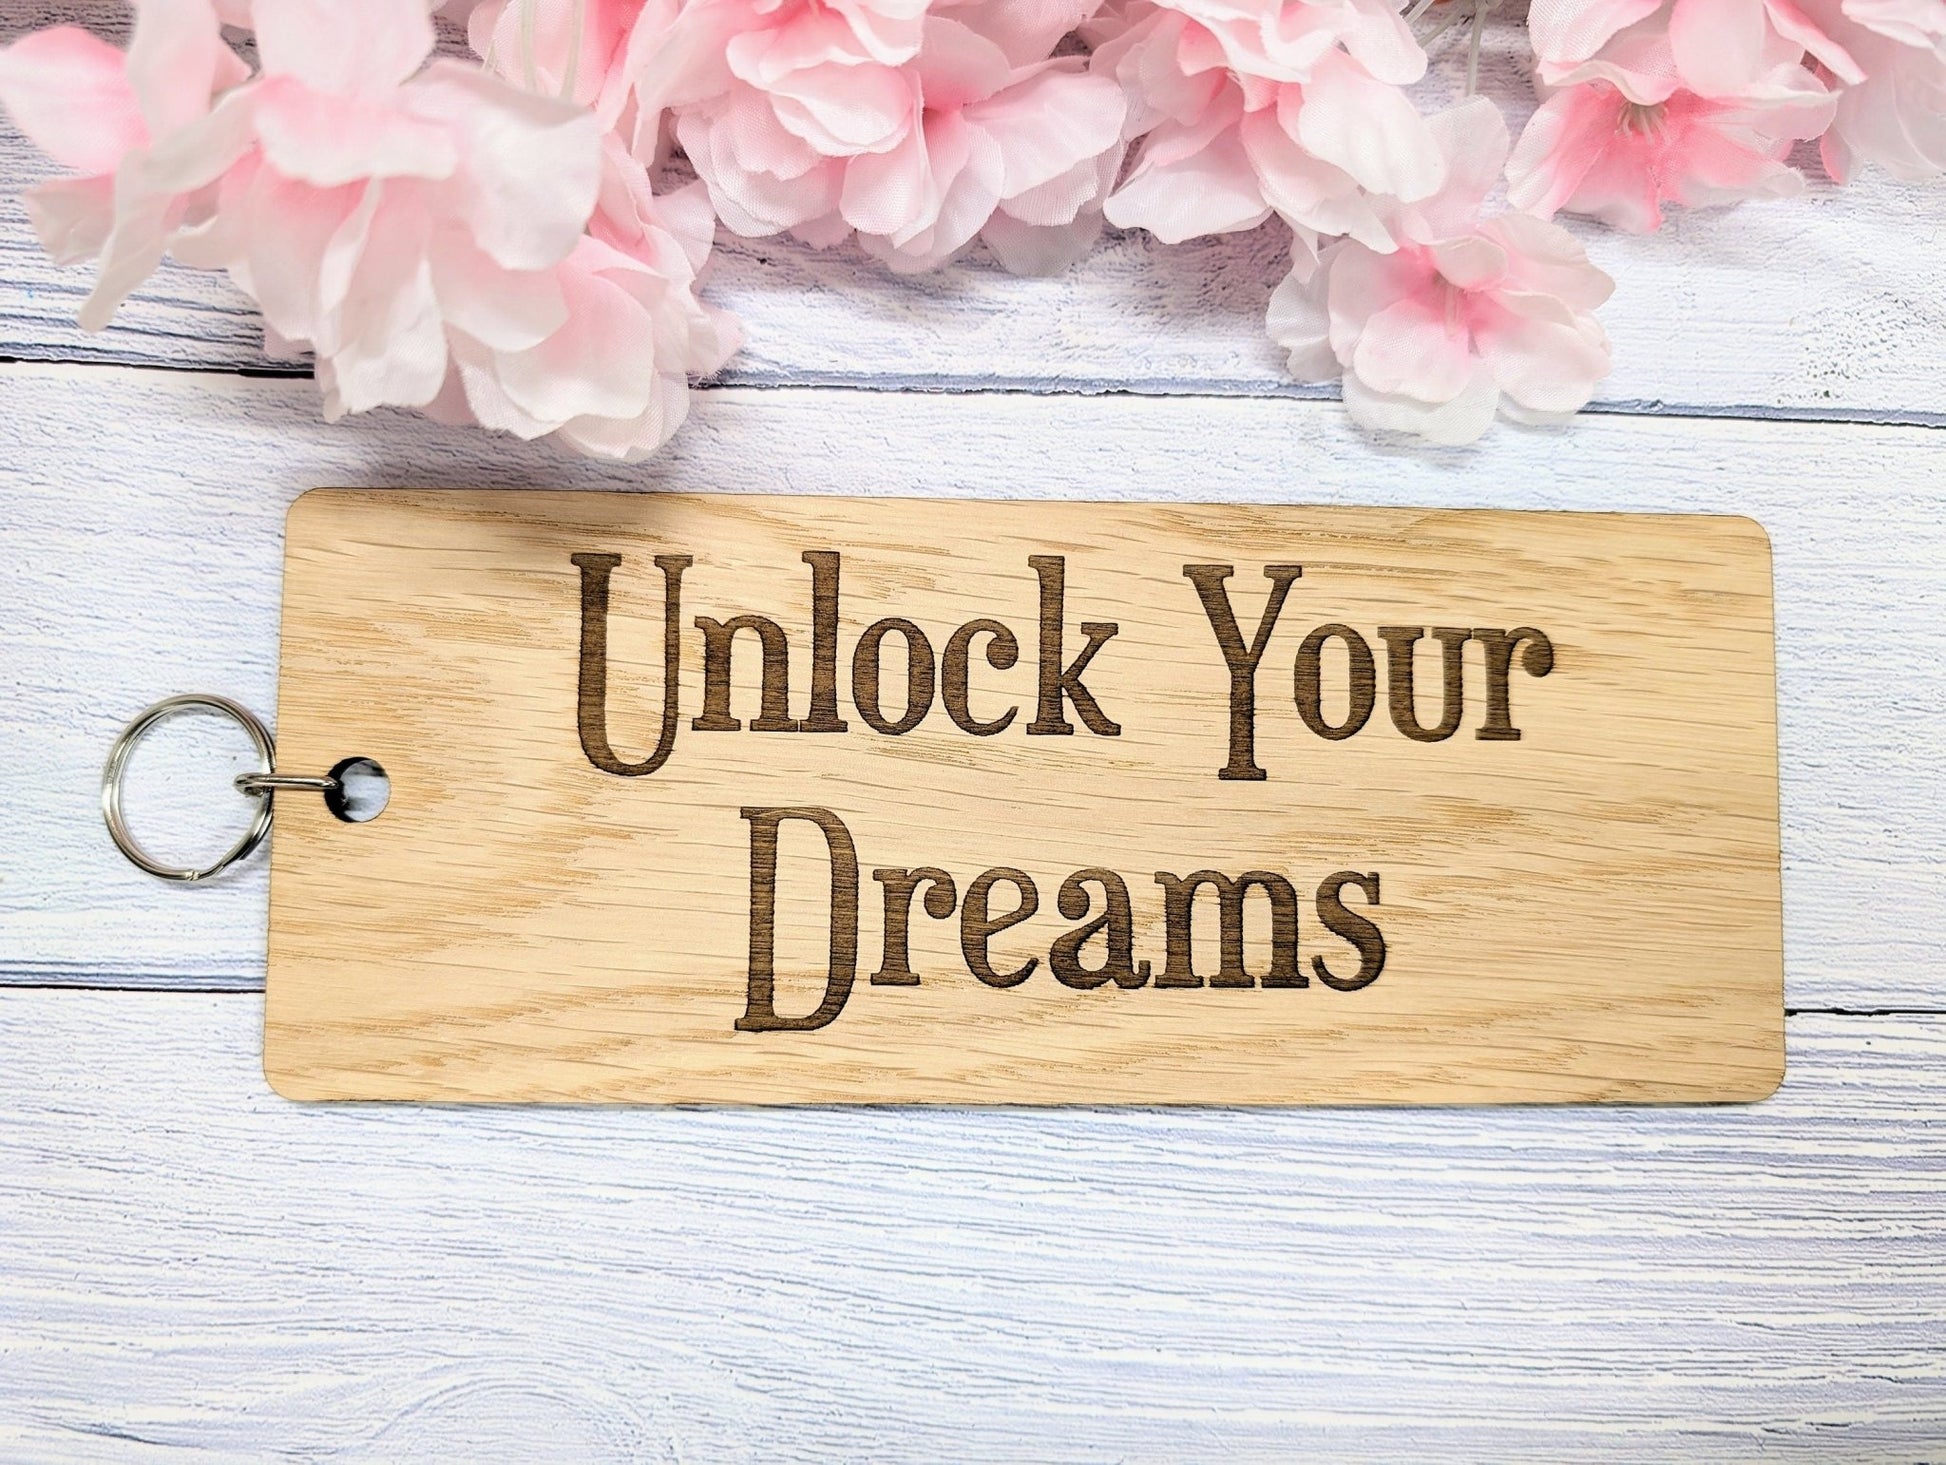 Extra-Large 200x80mm "Unlock Your Dreams" Wooden Keyring – Inspirational Oak Veneer Key Accessory for Dreamers - CherryGroveCraft